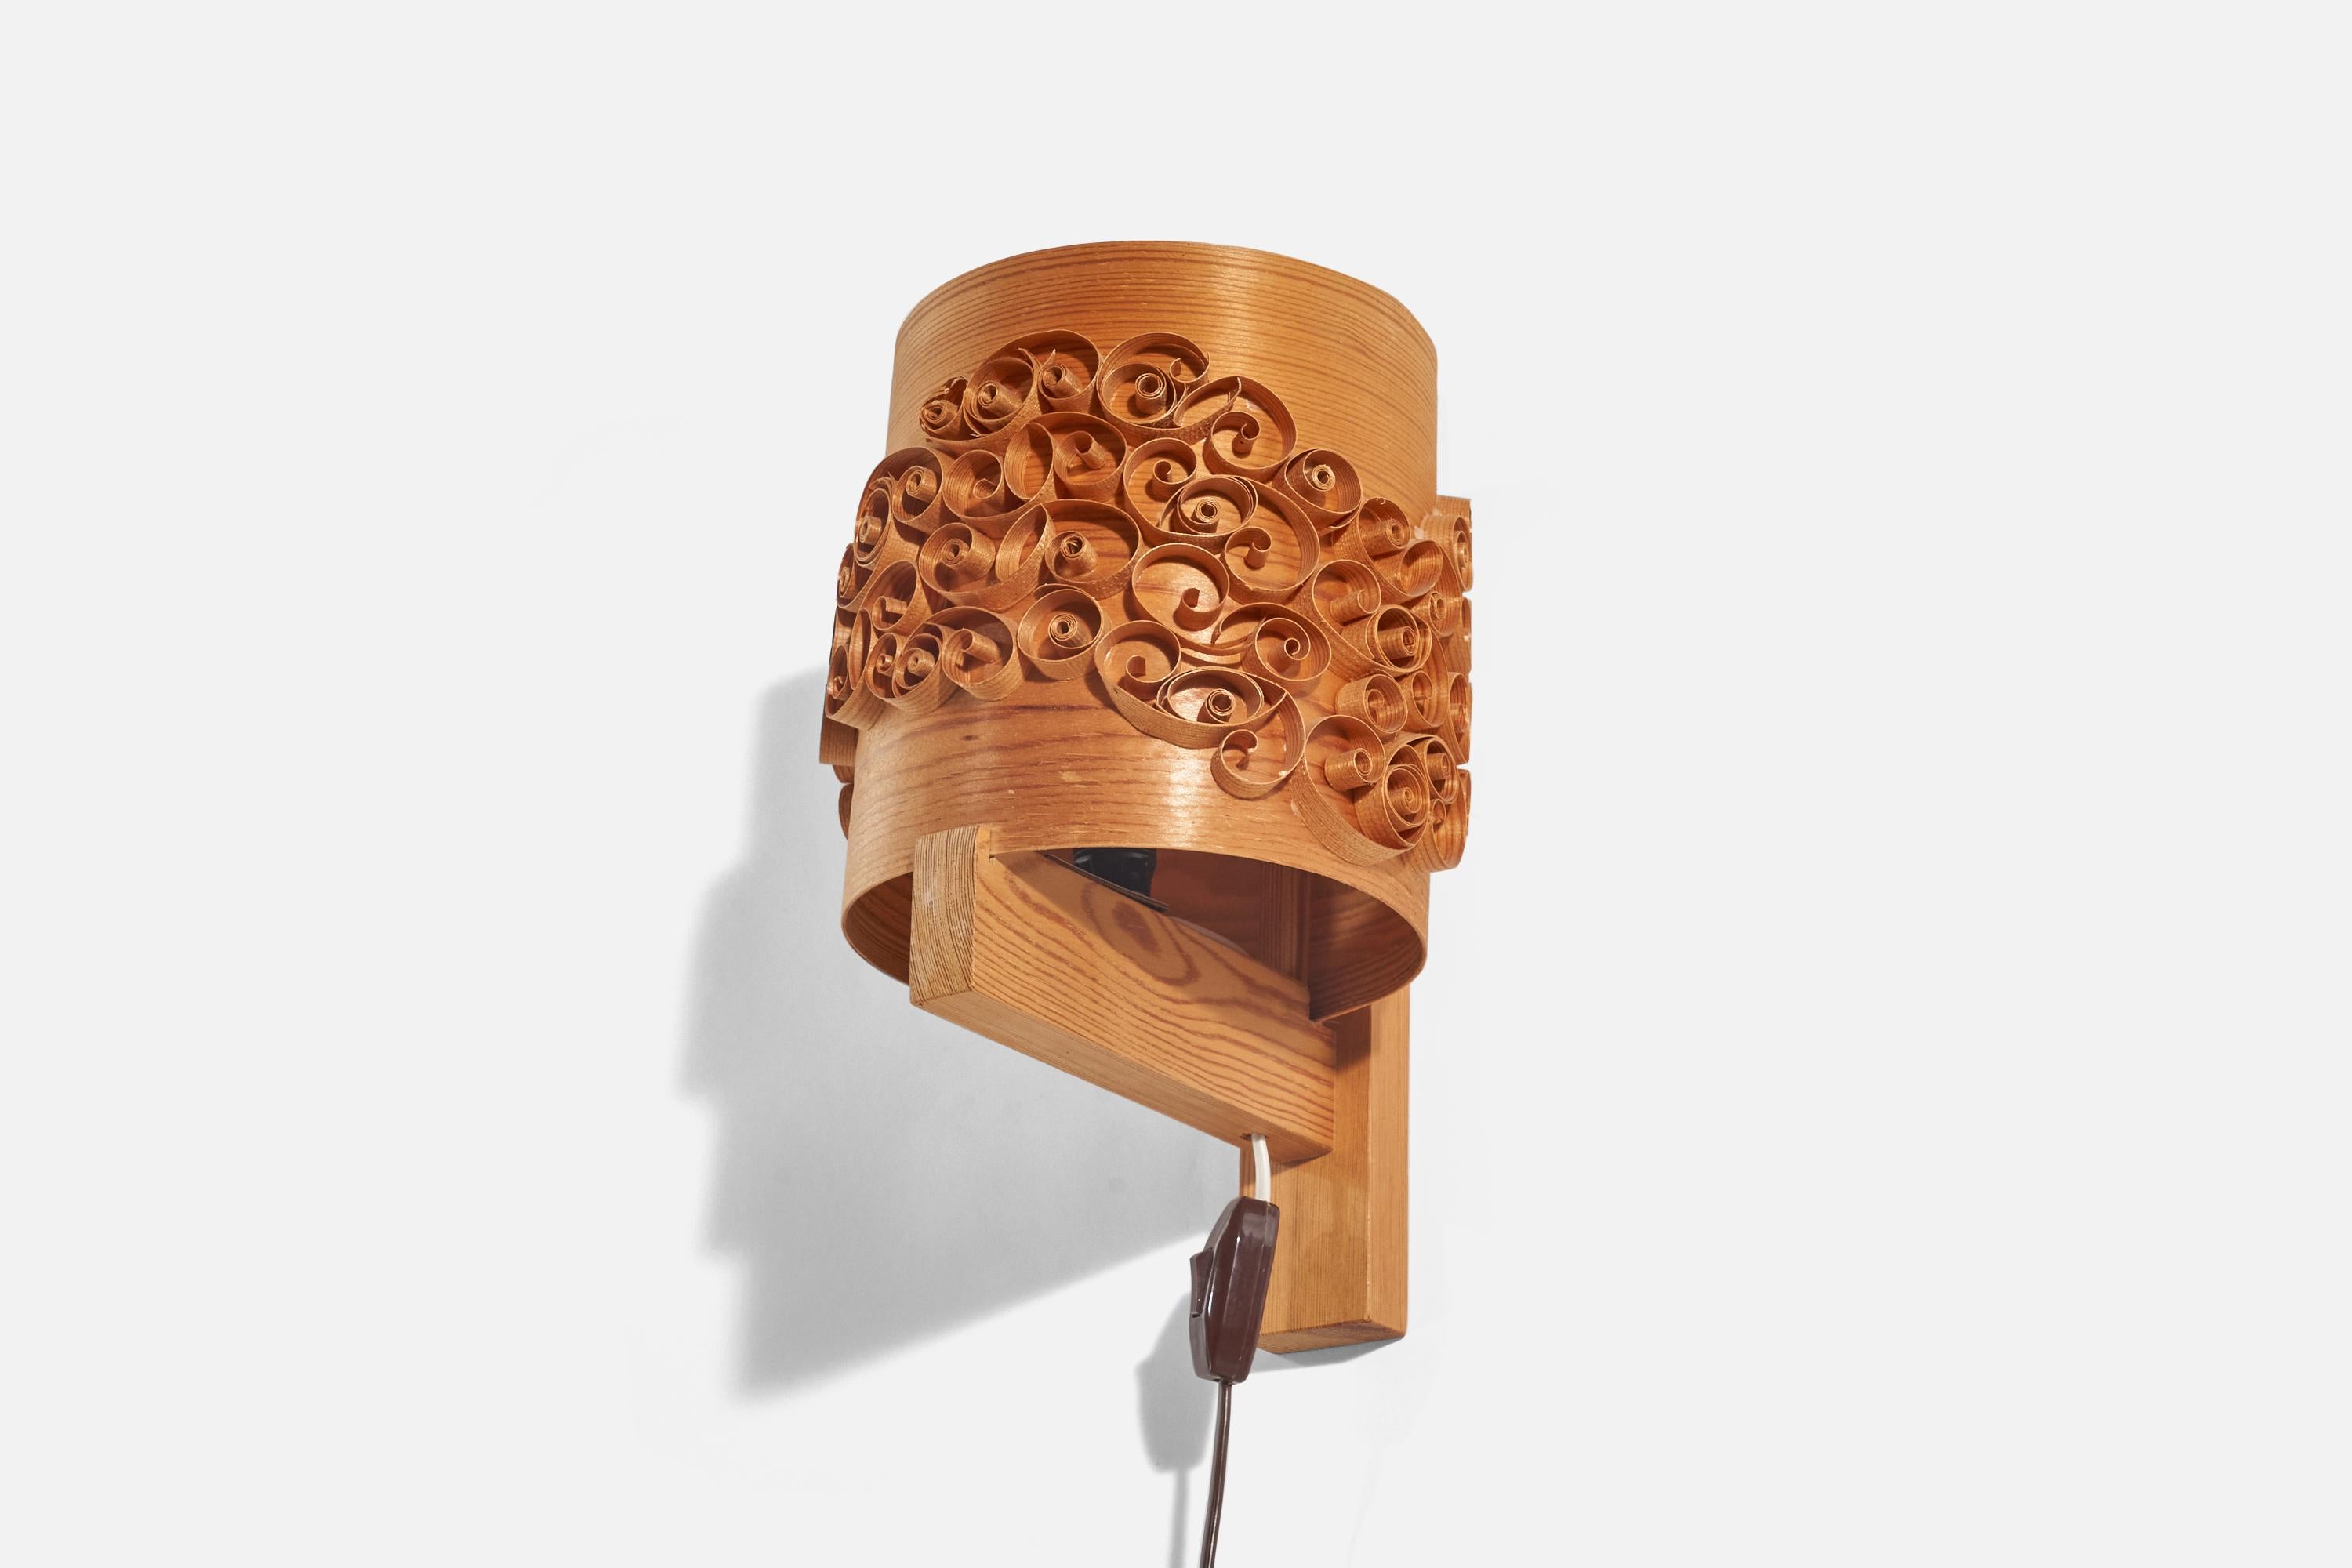 A pine and moulded pine-veneer sconce / wall light designed and produced in Sweden, 1970s.

Dimensions of Back Plate (inches) : 13.81 x 2 x 0.94 (Height x Width x Depth).

Socket takes E-14 bulb.

There is no maximum wattage stated on the